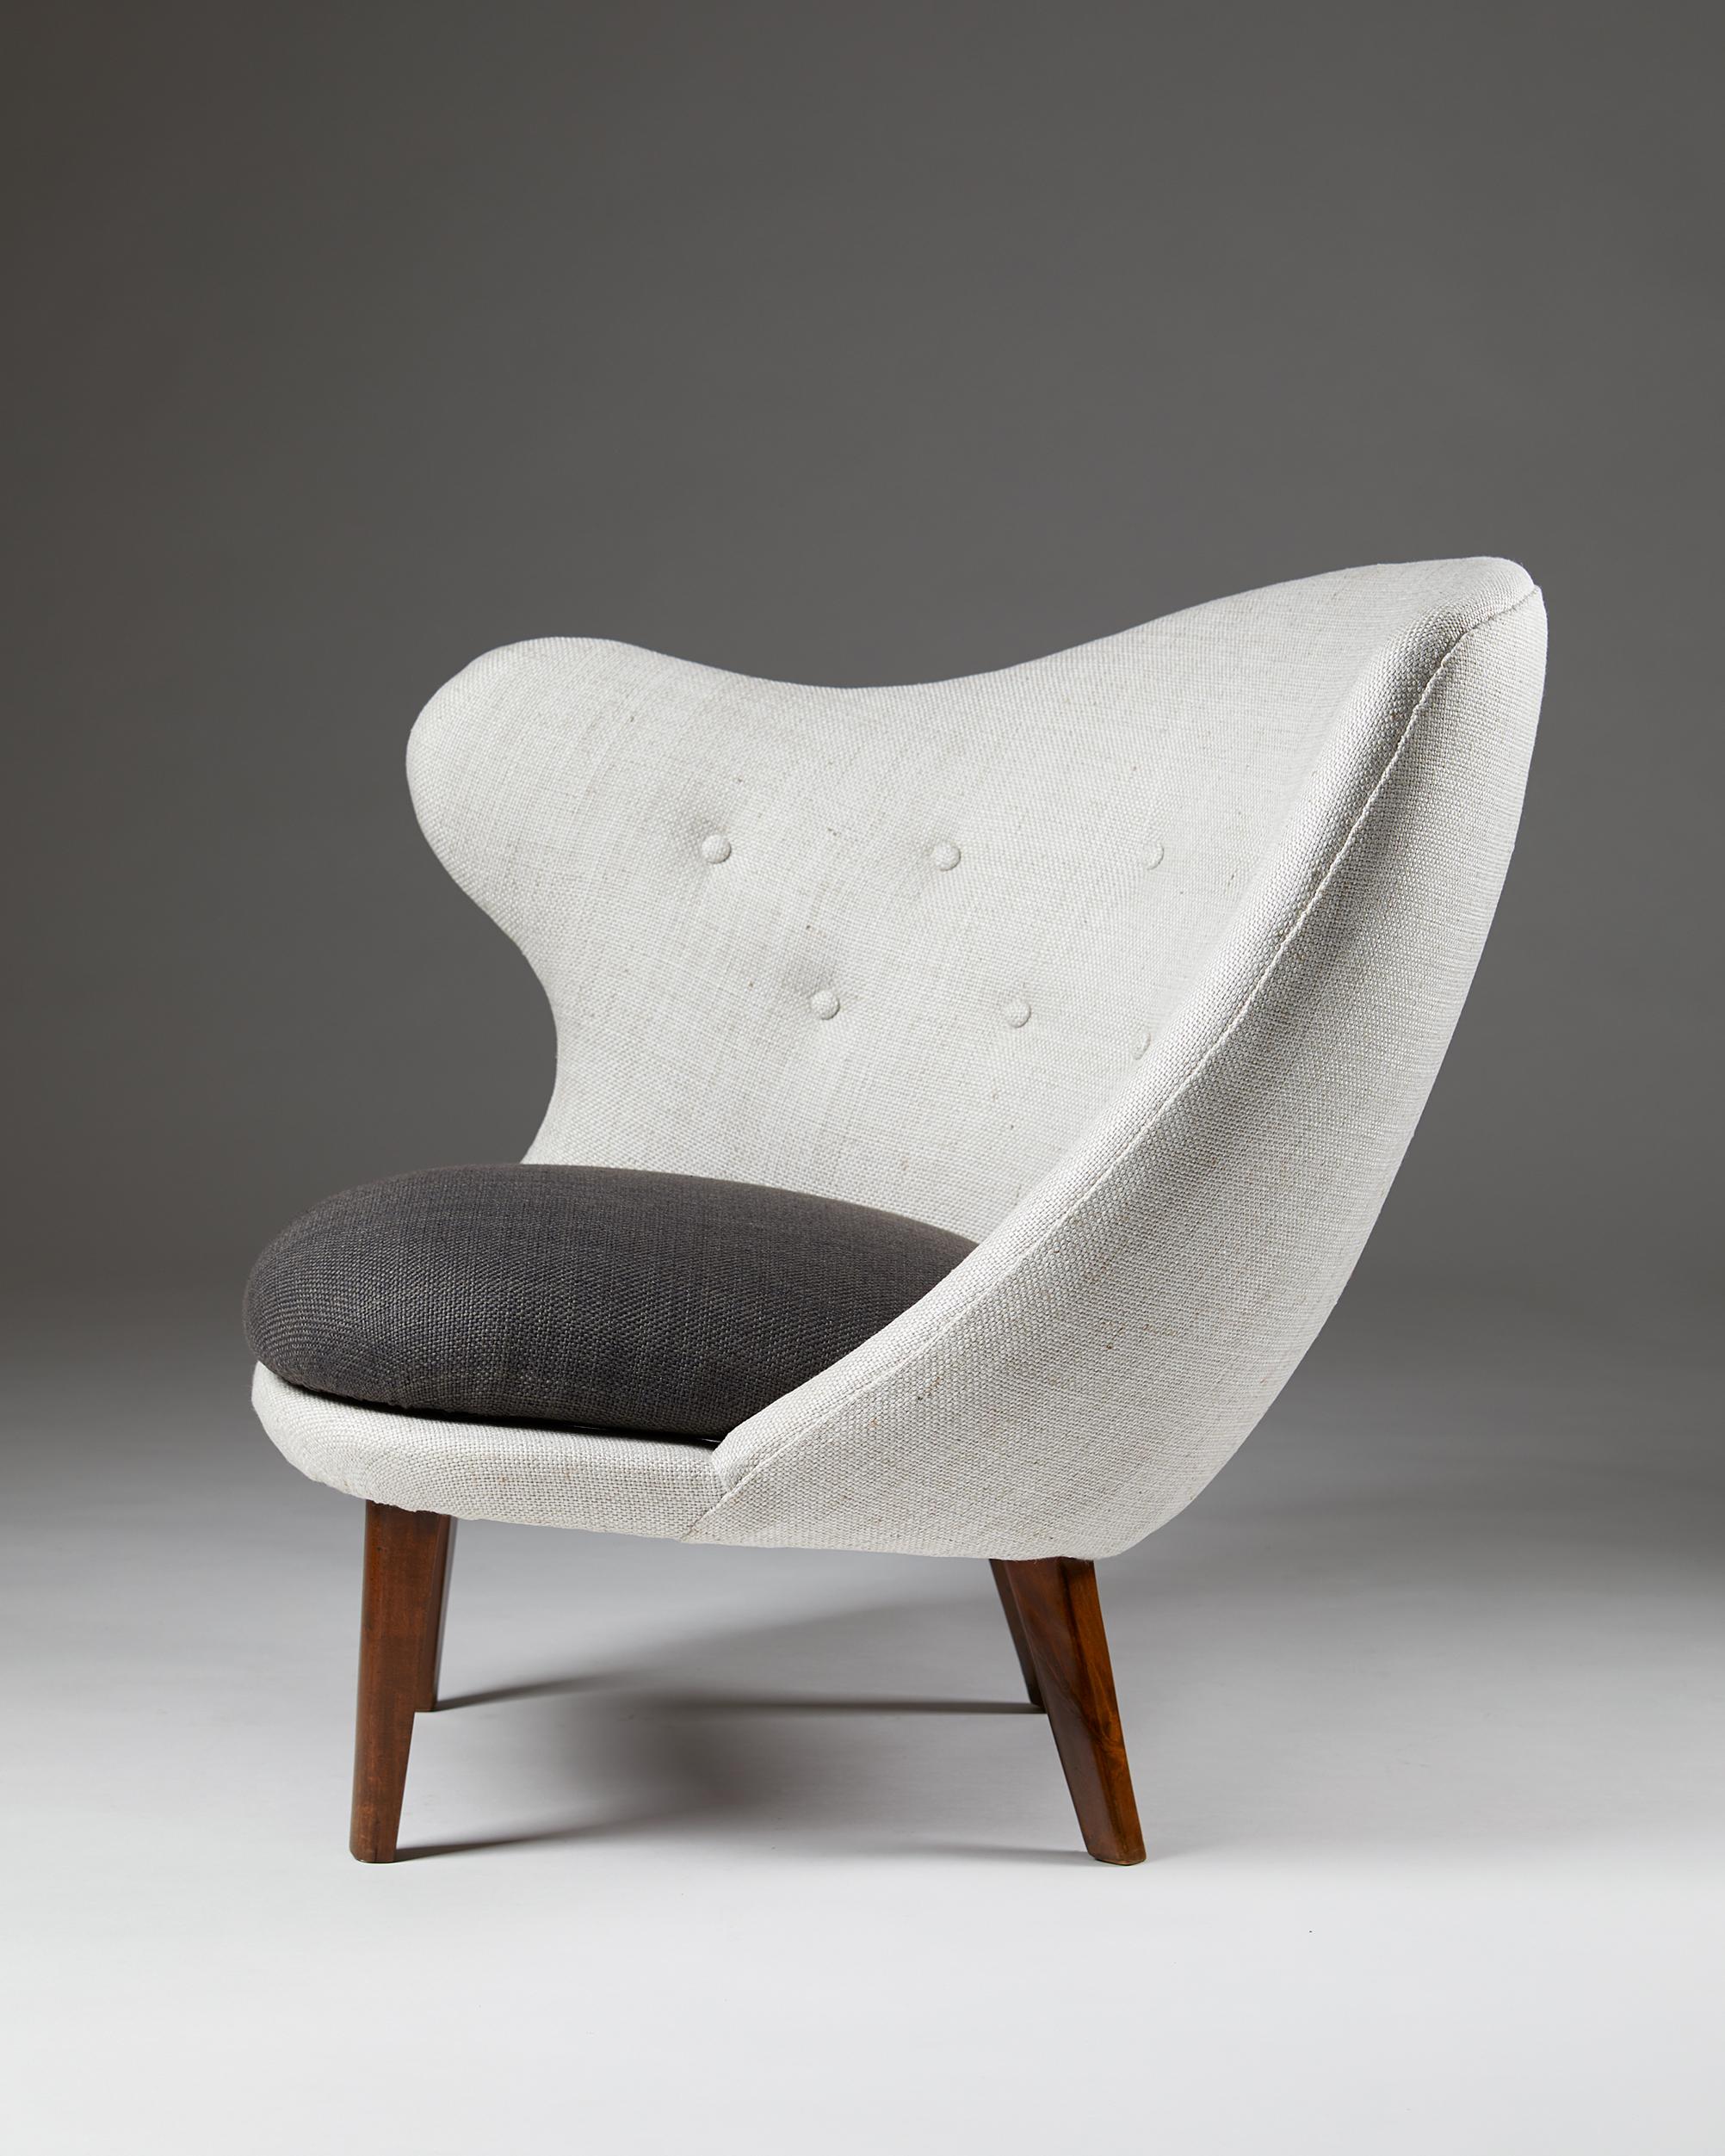 Wool upholstery and birch legs

Measures: H 78 cm/ 2' 7 1/4